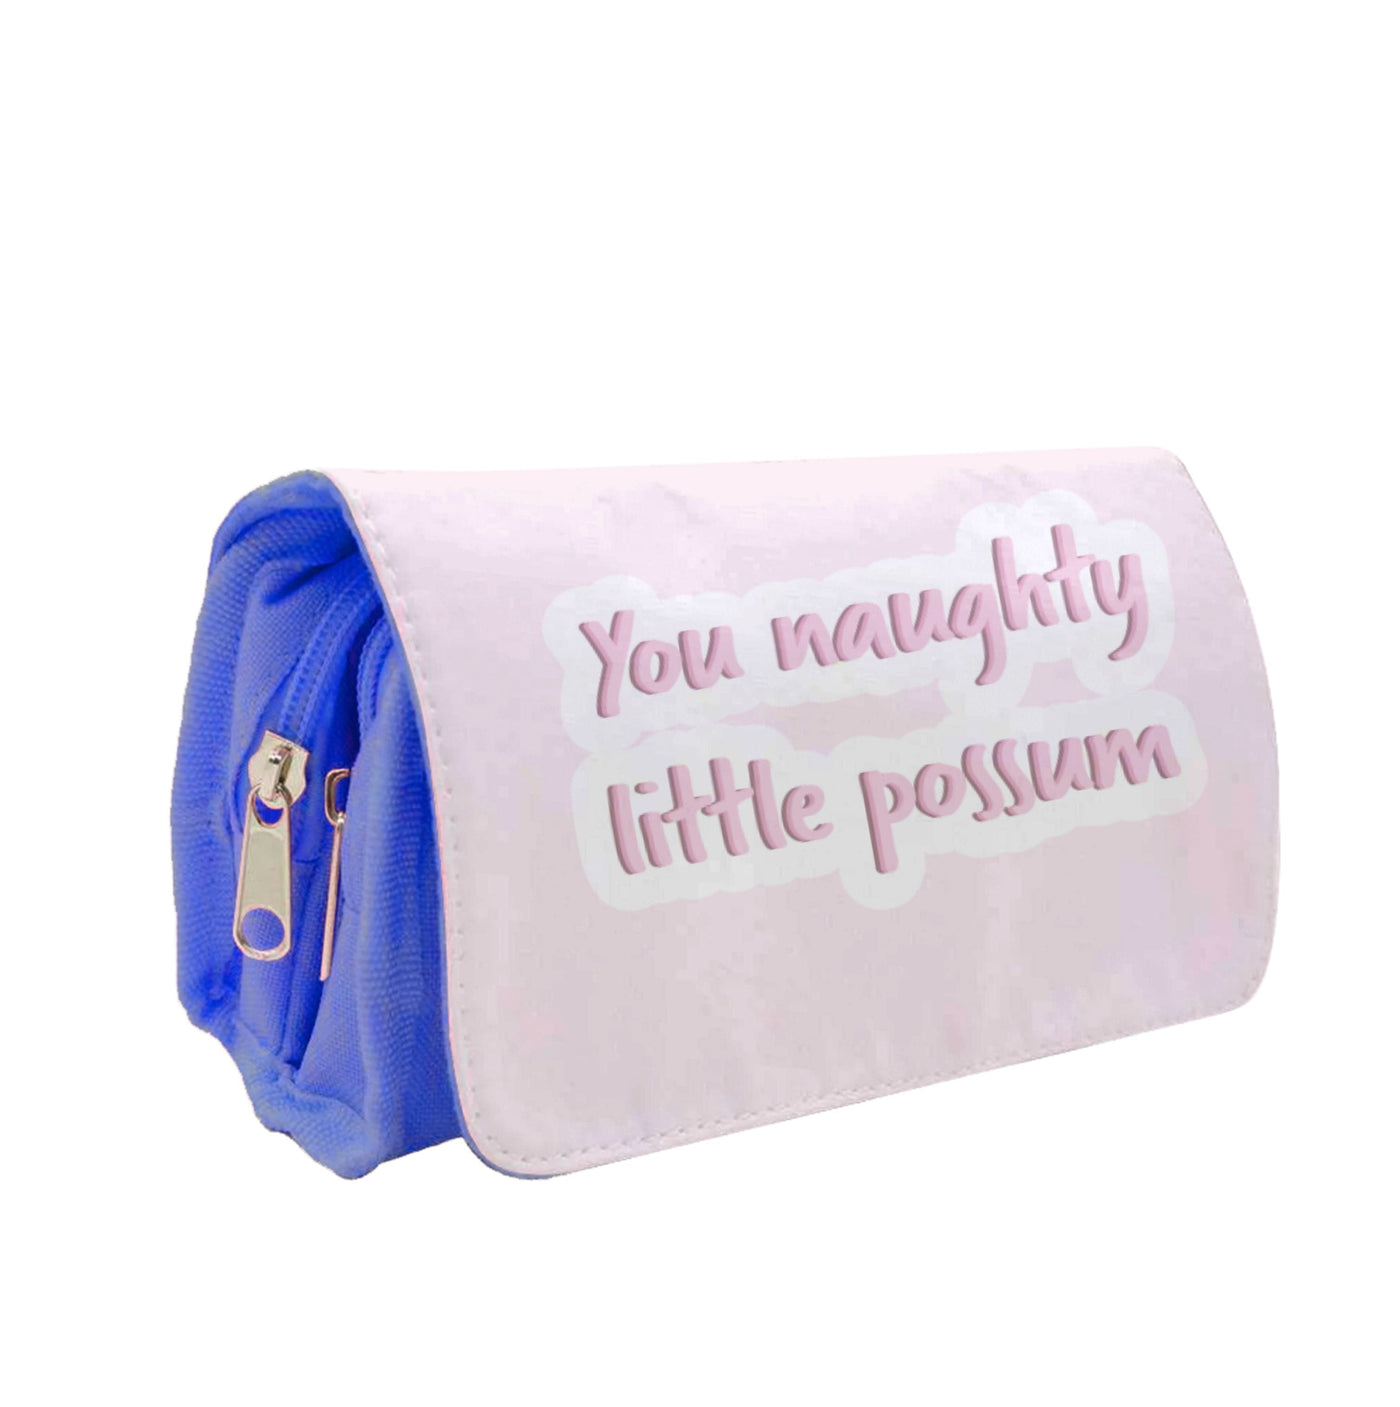 You Naughty Little Possum - Too Hot To Handle Pencil Case